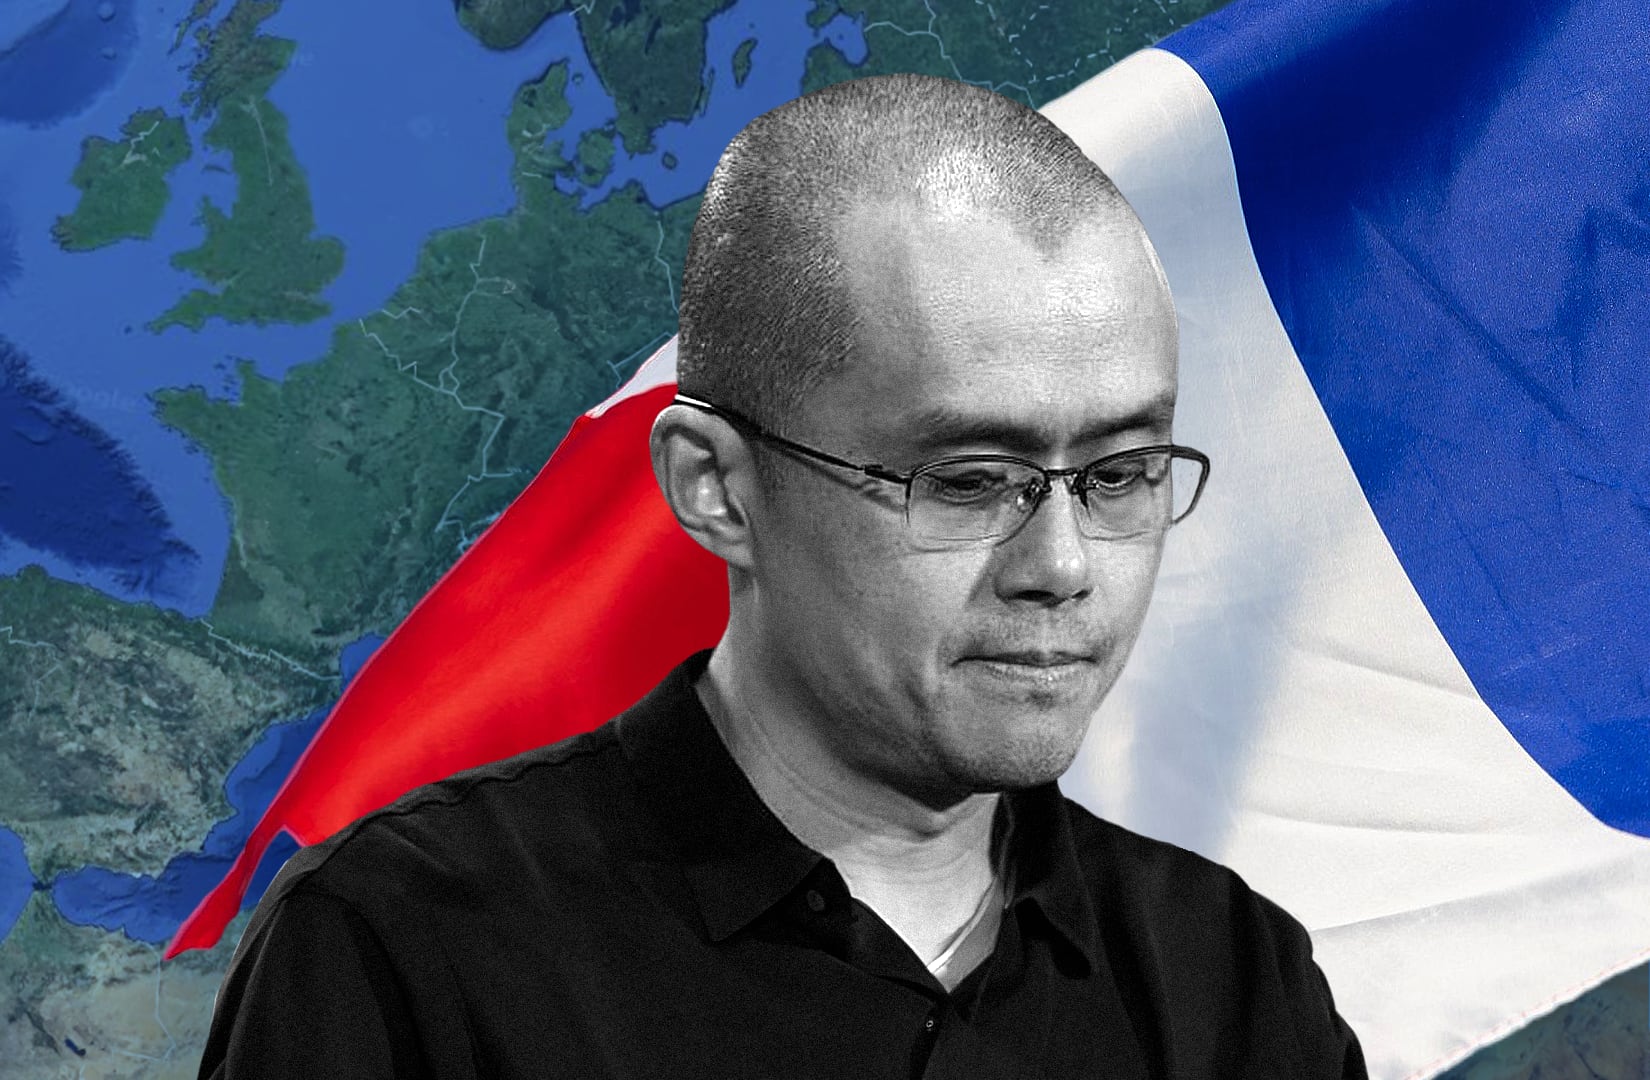 Convicted CZ owns 100% of Binance France. Now all of EU access is under threat